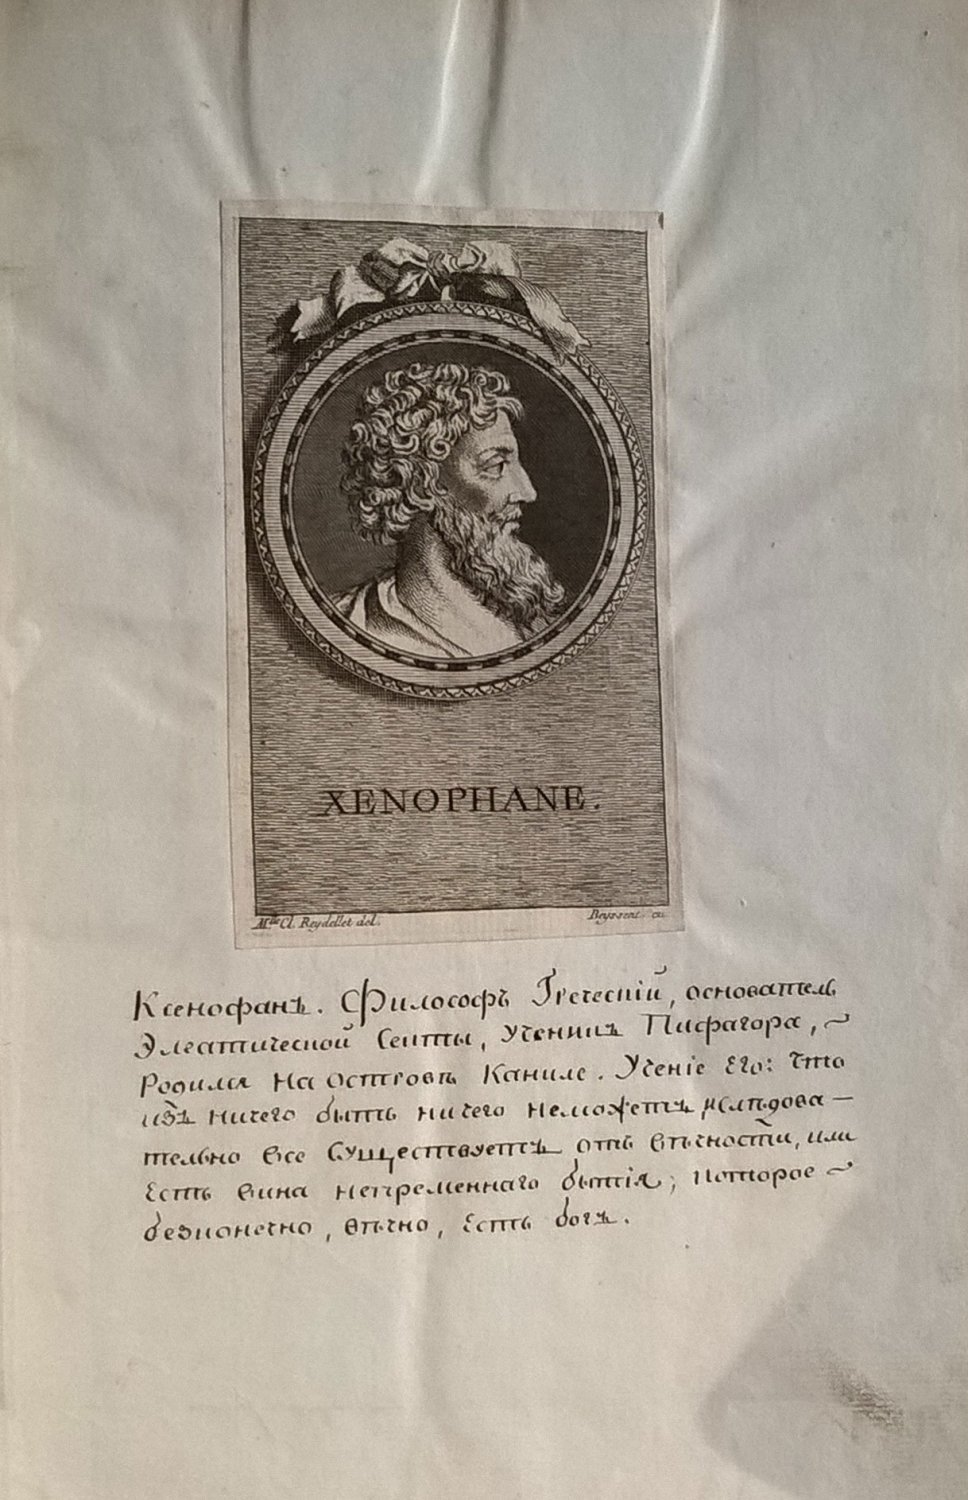 Part I - Ancient Learned Scholars. 1800. Rare book in Russian